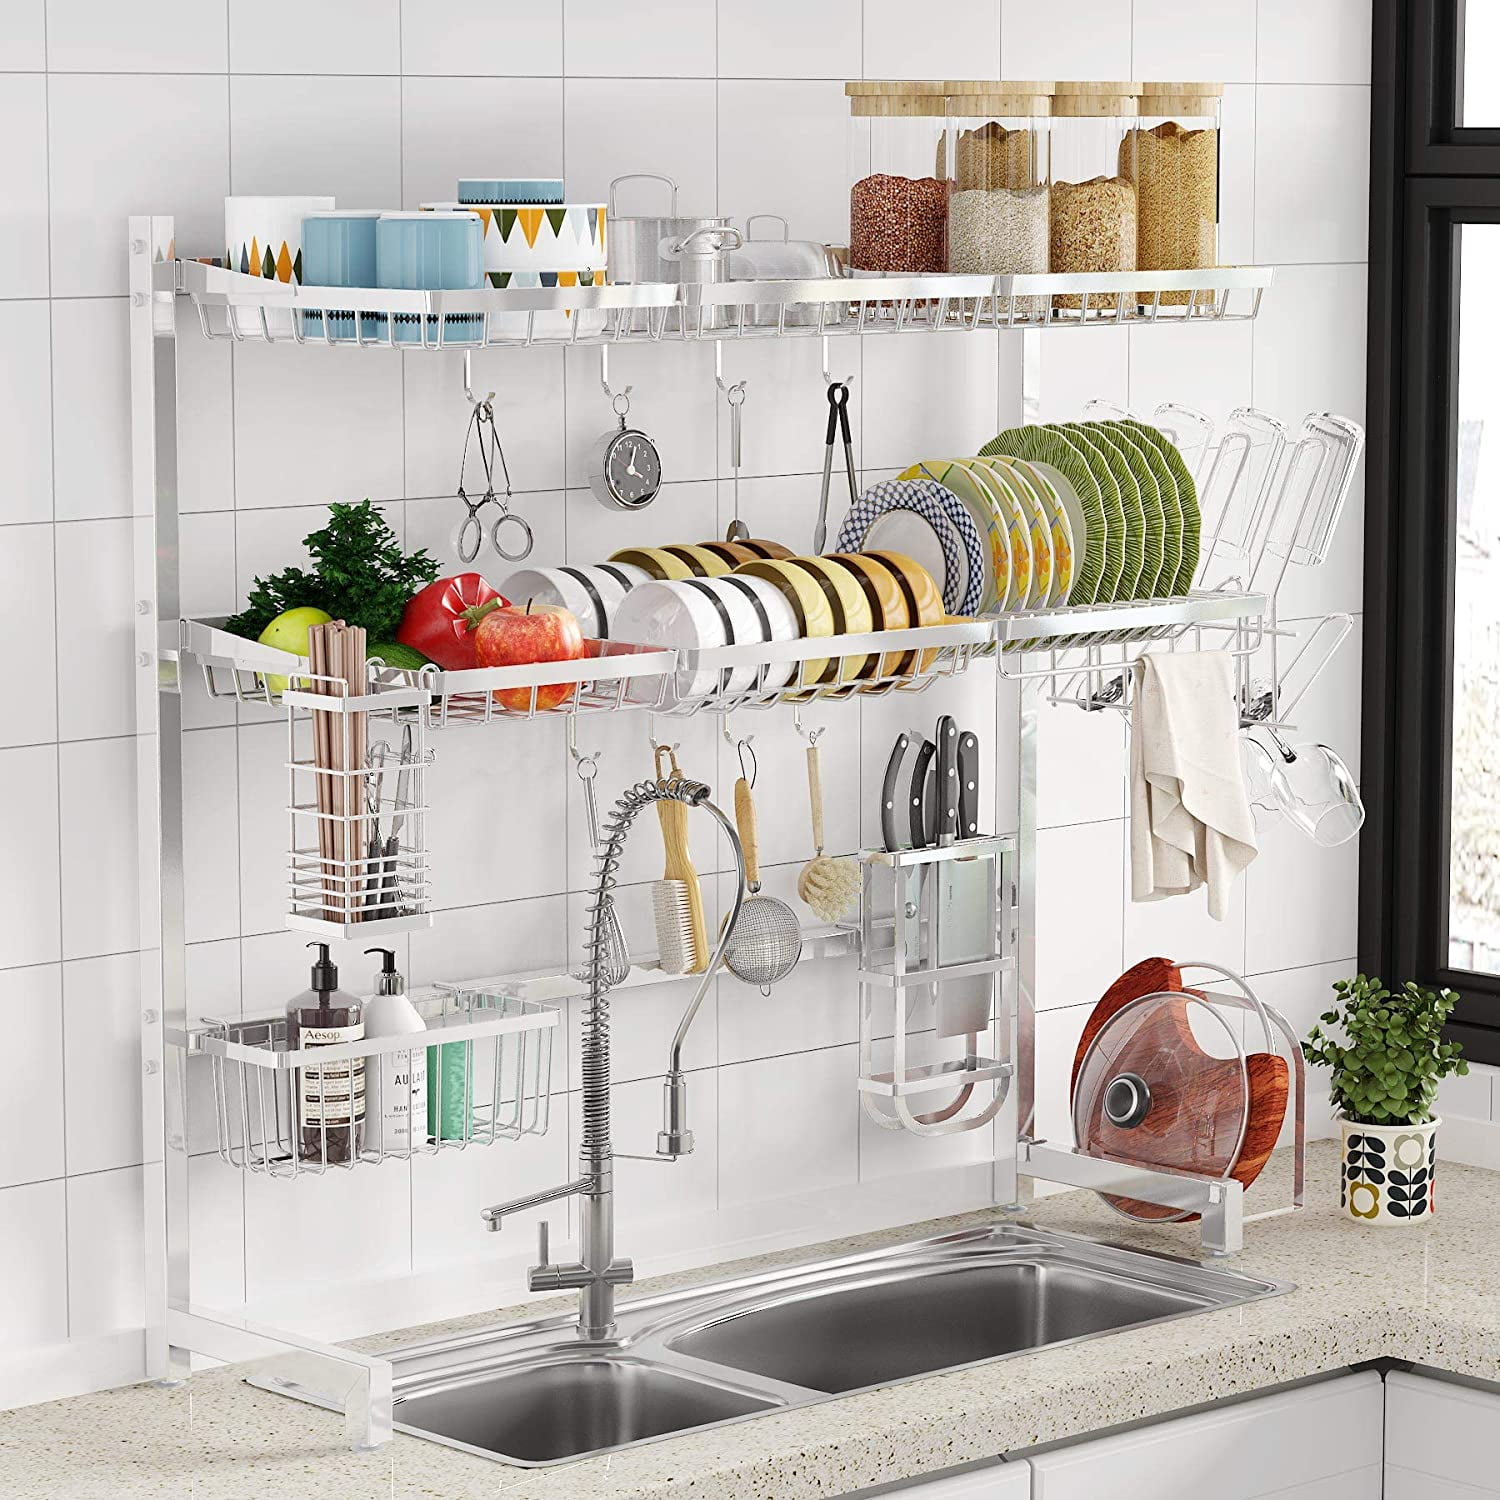 Over the Sink Dish Drying Rack -1Easylife 3 Tier Stainless Steel Large  Kitchen Rack Dish Drainers for Home Kitchen Counter Storage, Shelf with  Utensil Holder, Above Sink Non-Slip Shelves Organizer - Walmart.com